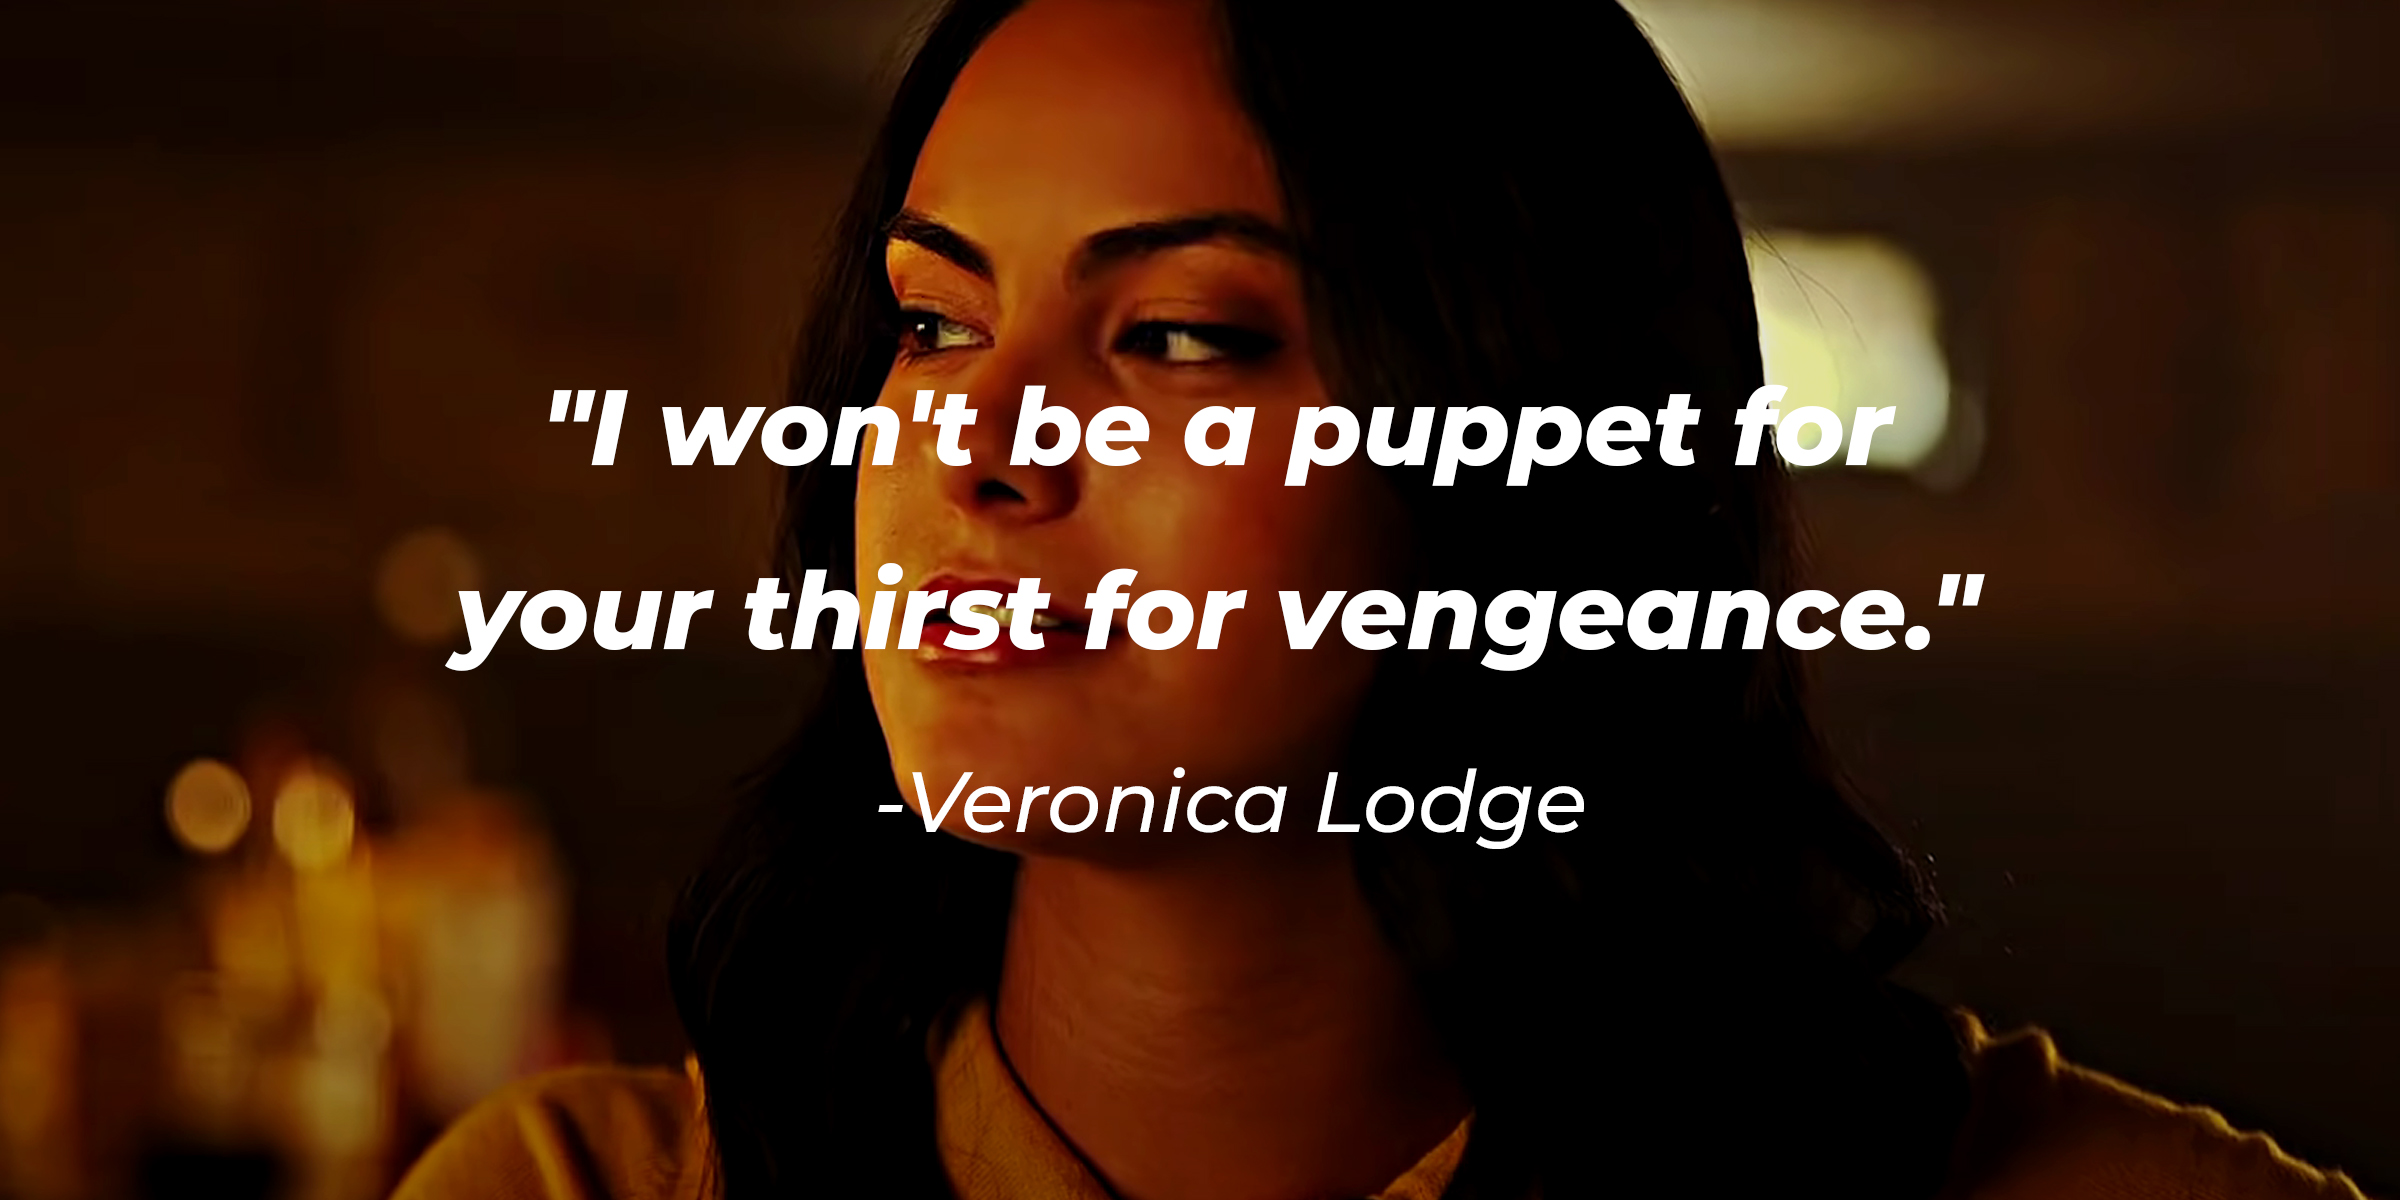 A photo of Veronica Lodge with the quote, "I won't be a puppet for your thirst for vengeance." | Source: youtube.com/warnerbrostv